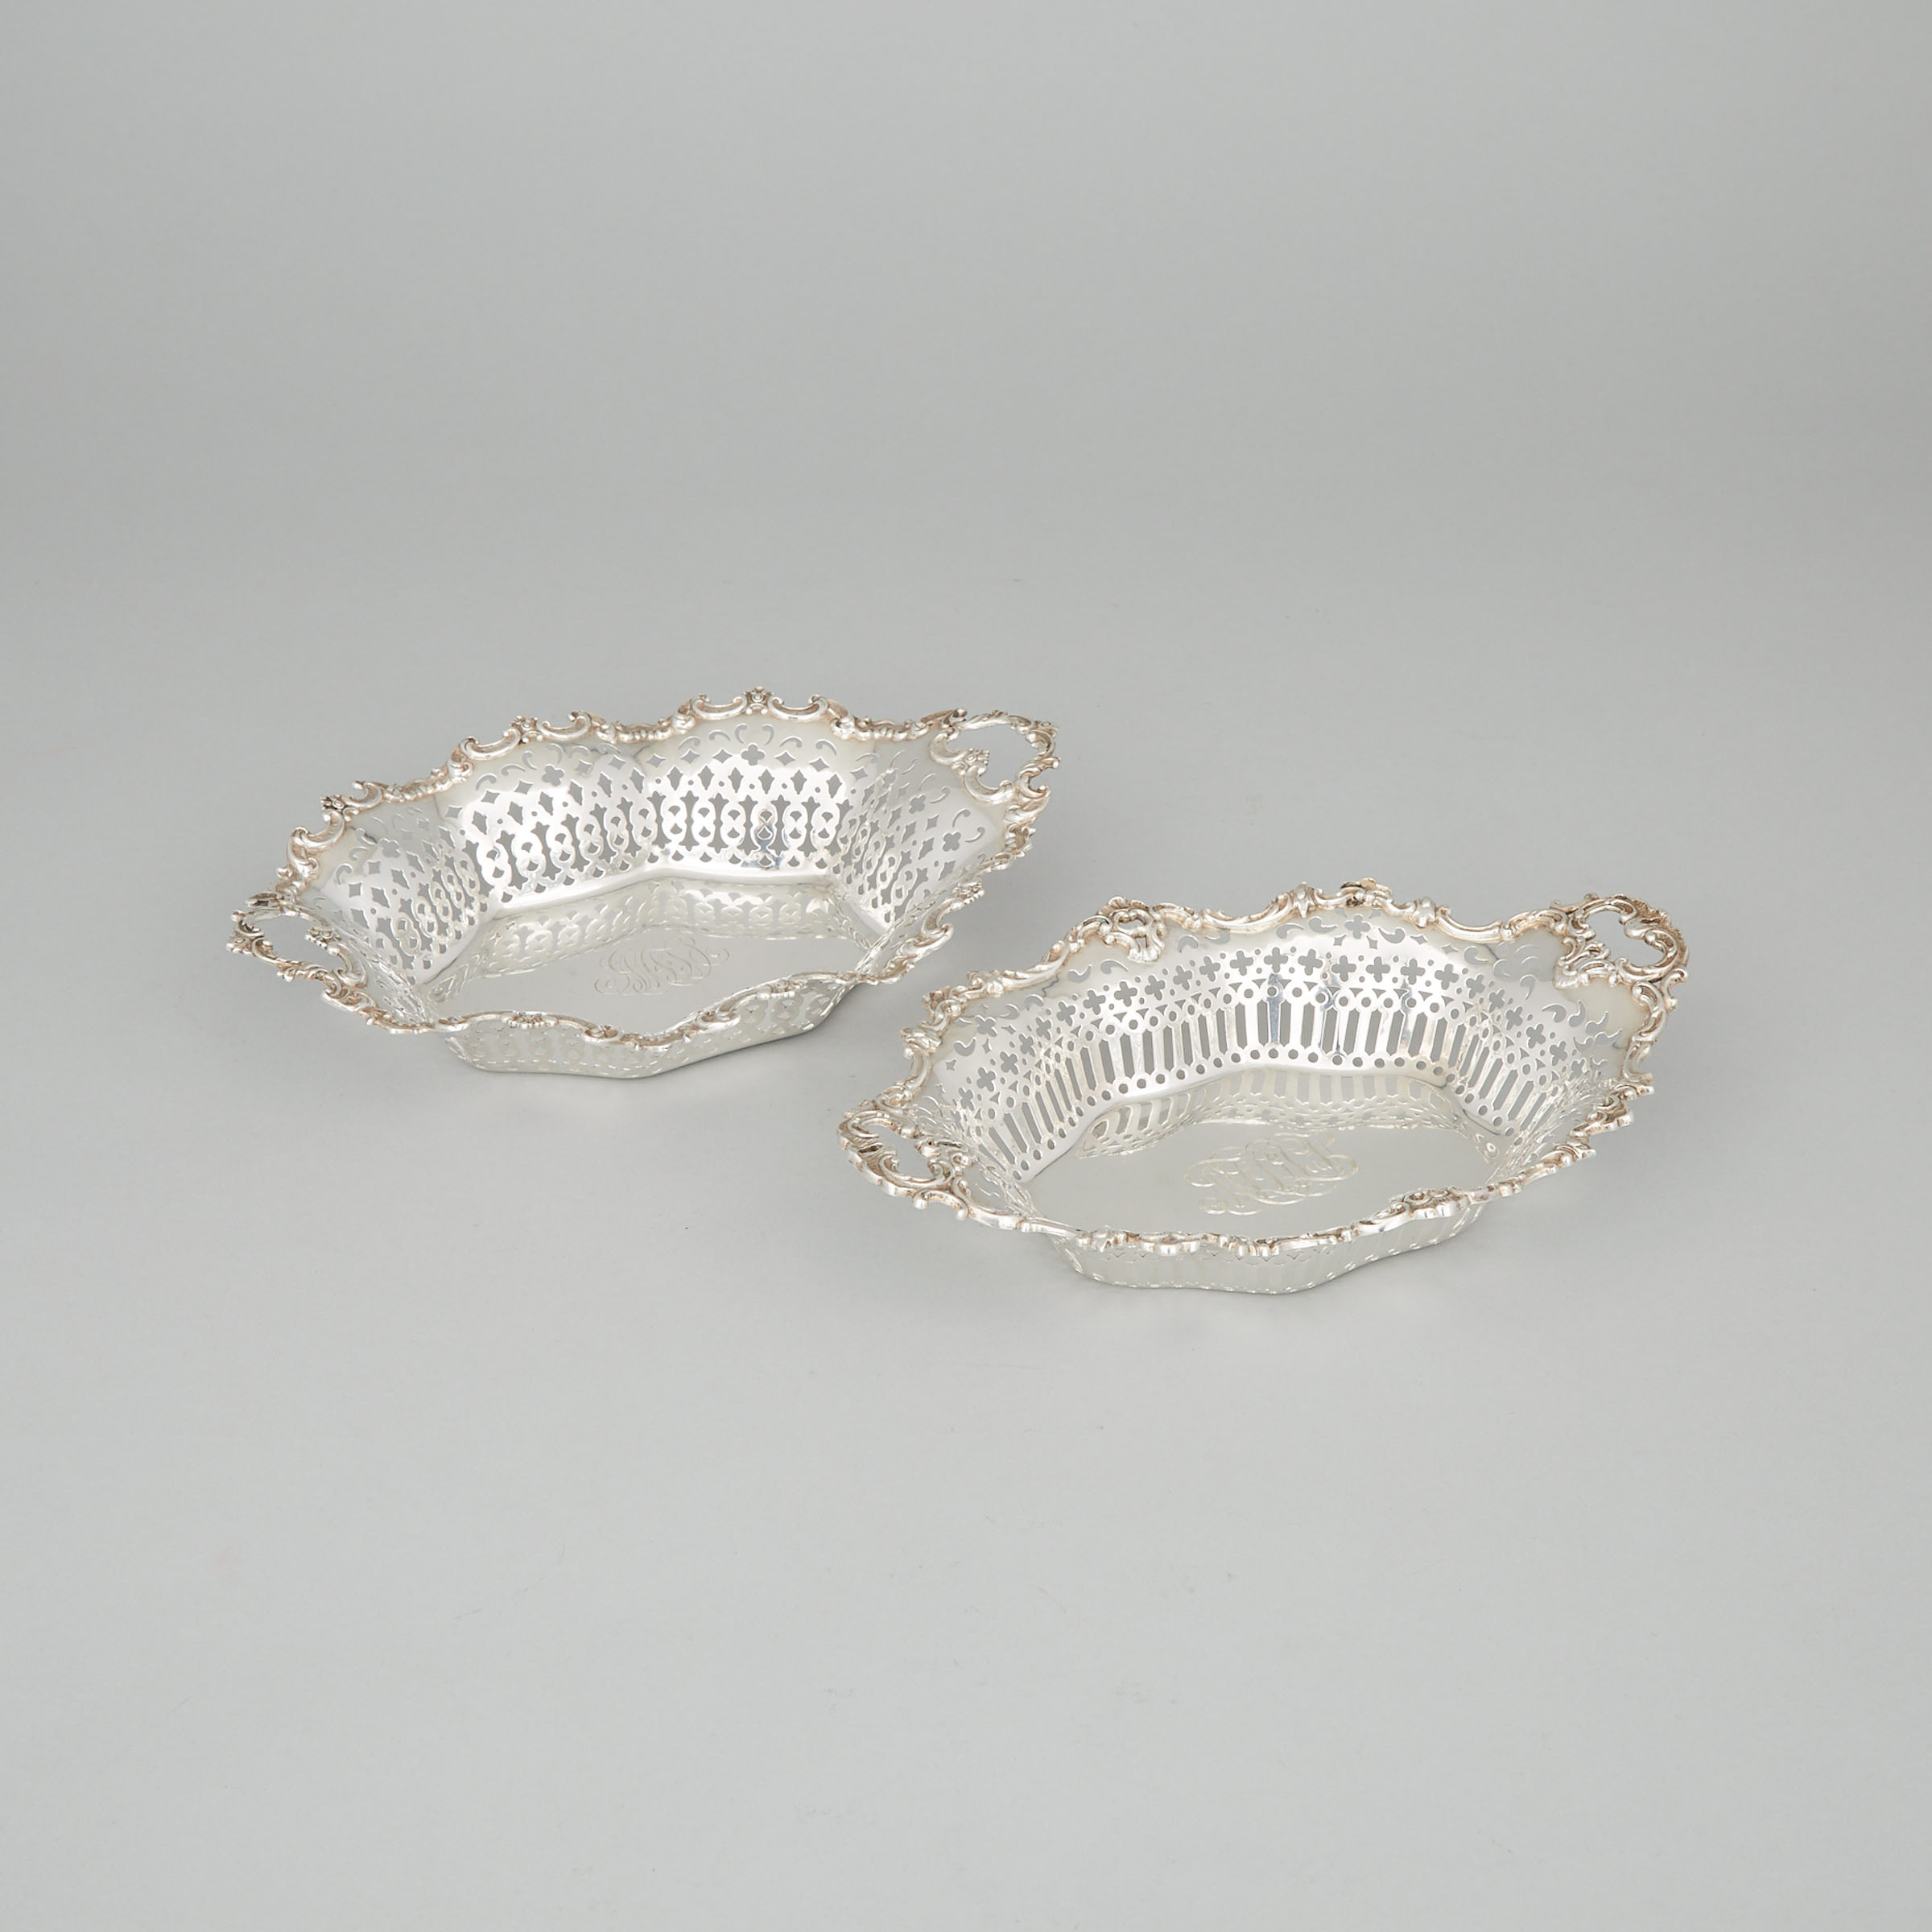 Two American Silver Pierced Oval Baskets, Roger Williams Silver Co., Providence, R.I., and Mauser Mfg. Co., New York, NY, c.1900